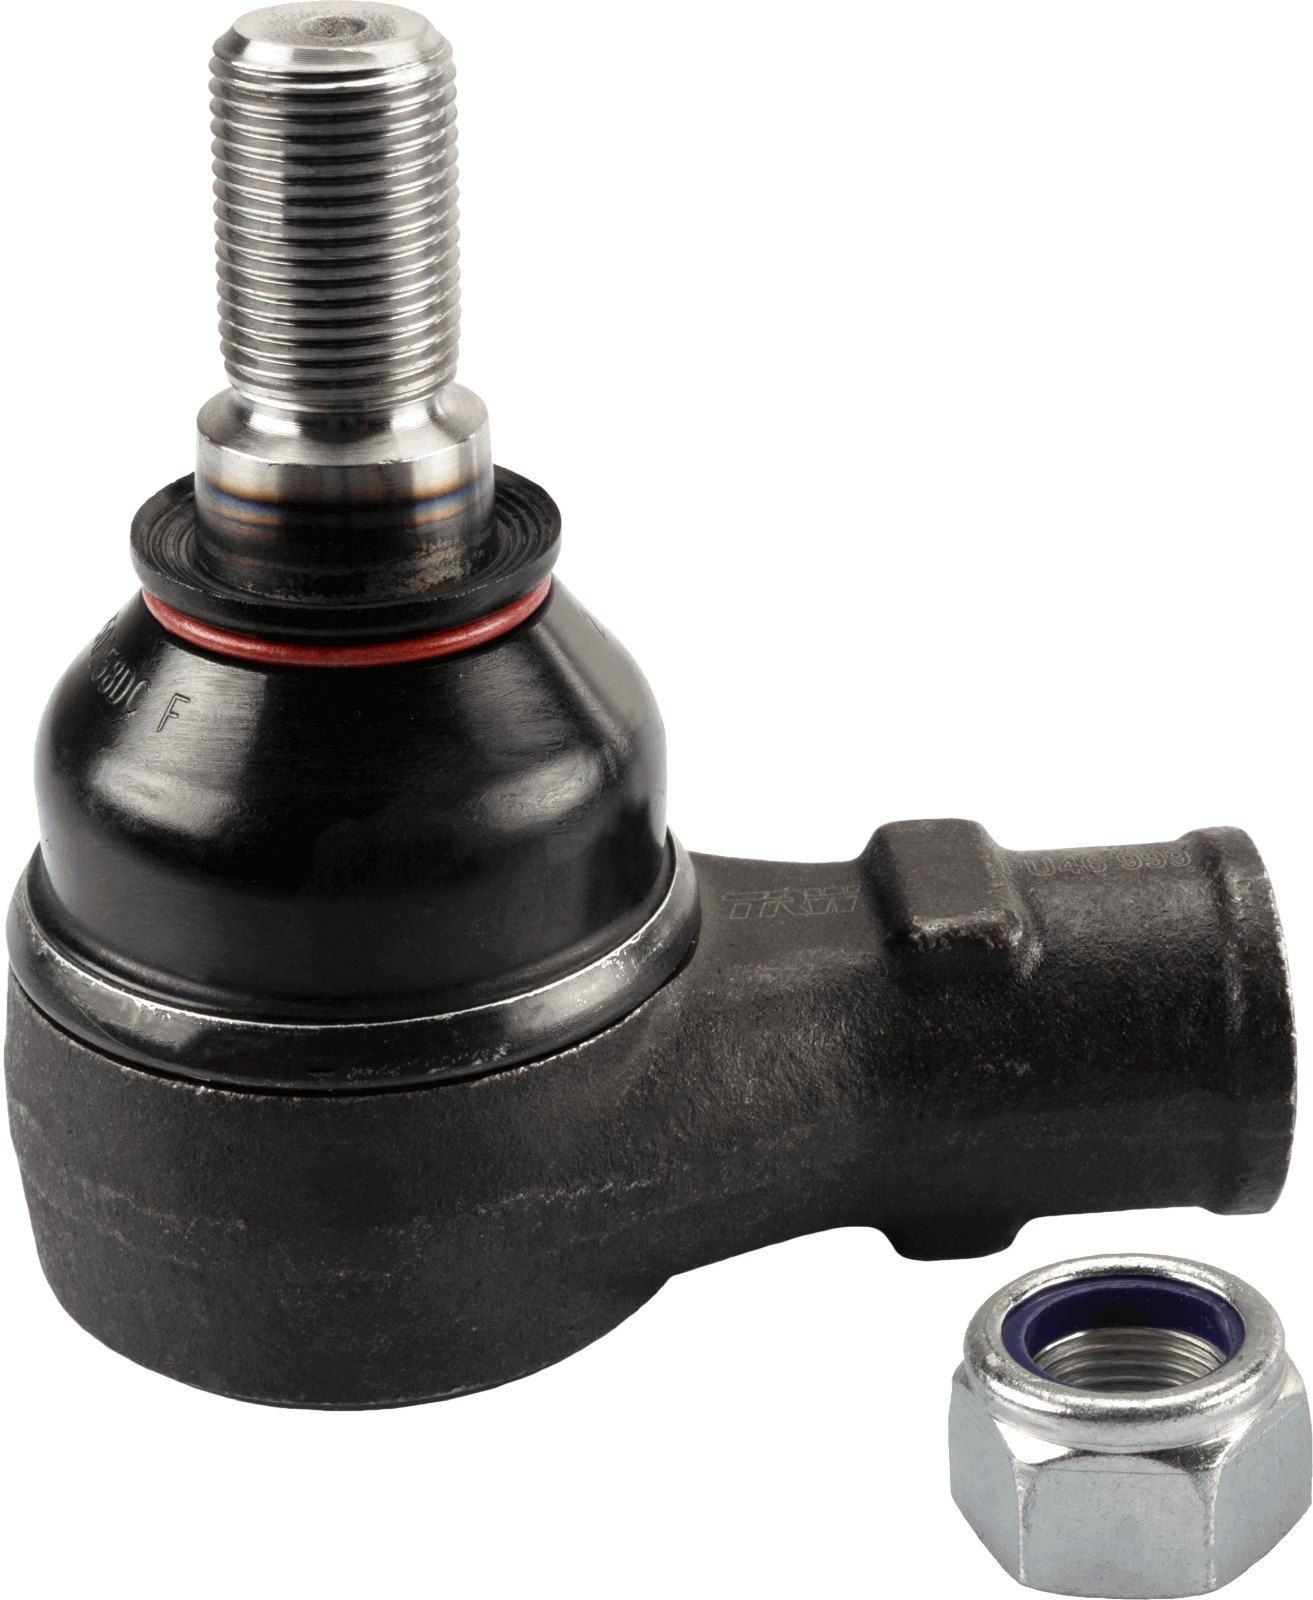 TRW JTE999 Ball Joint, axle strut cheap in online store